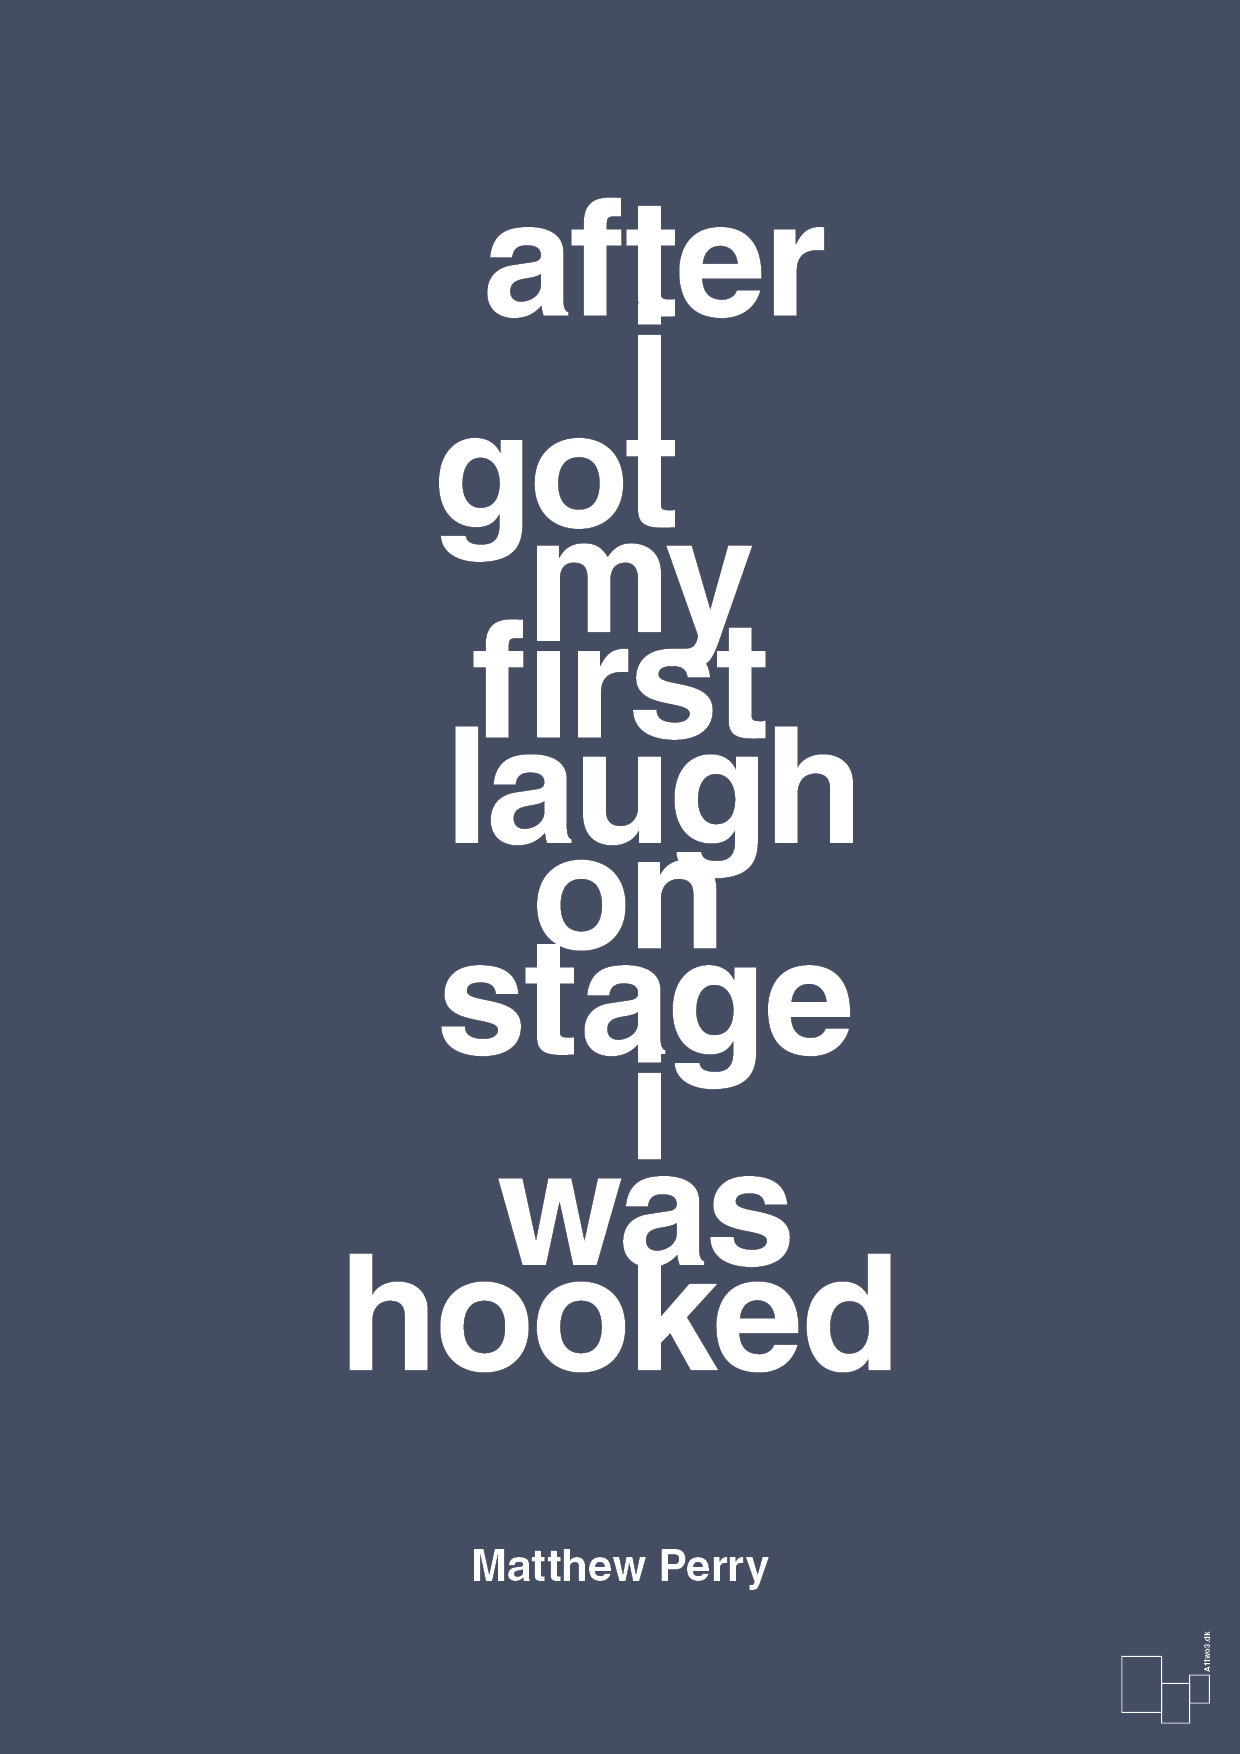 after i got my first laugh on stage i was hooked - Plakat med Citater i Petrol